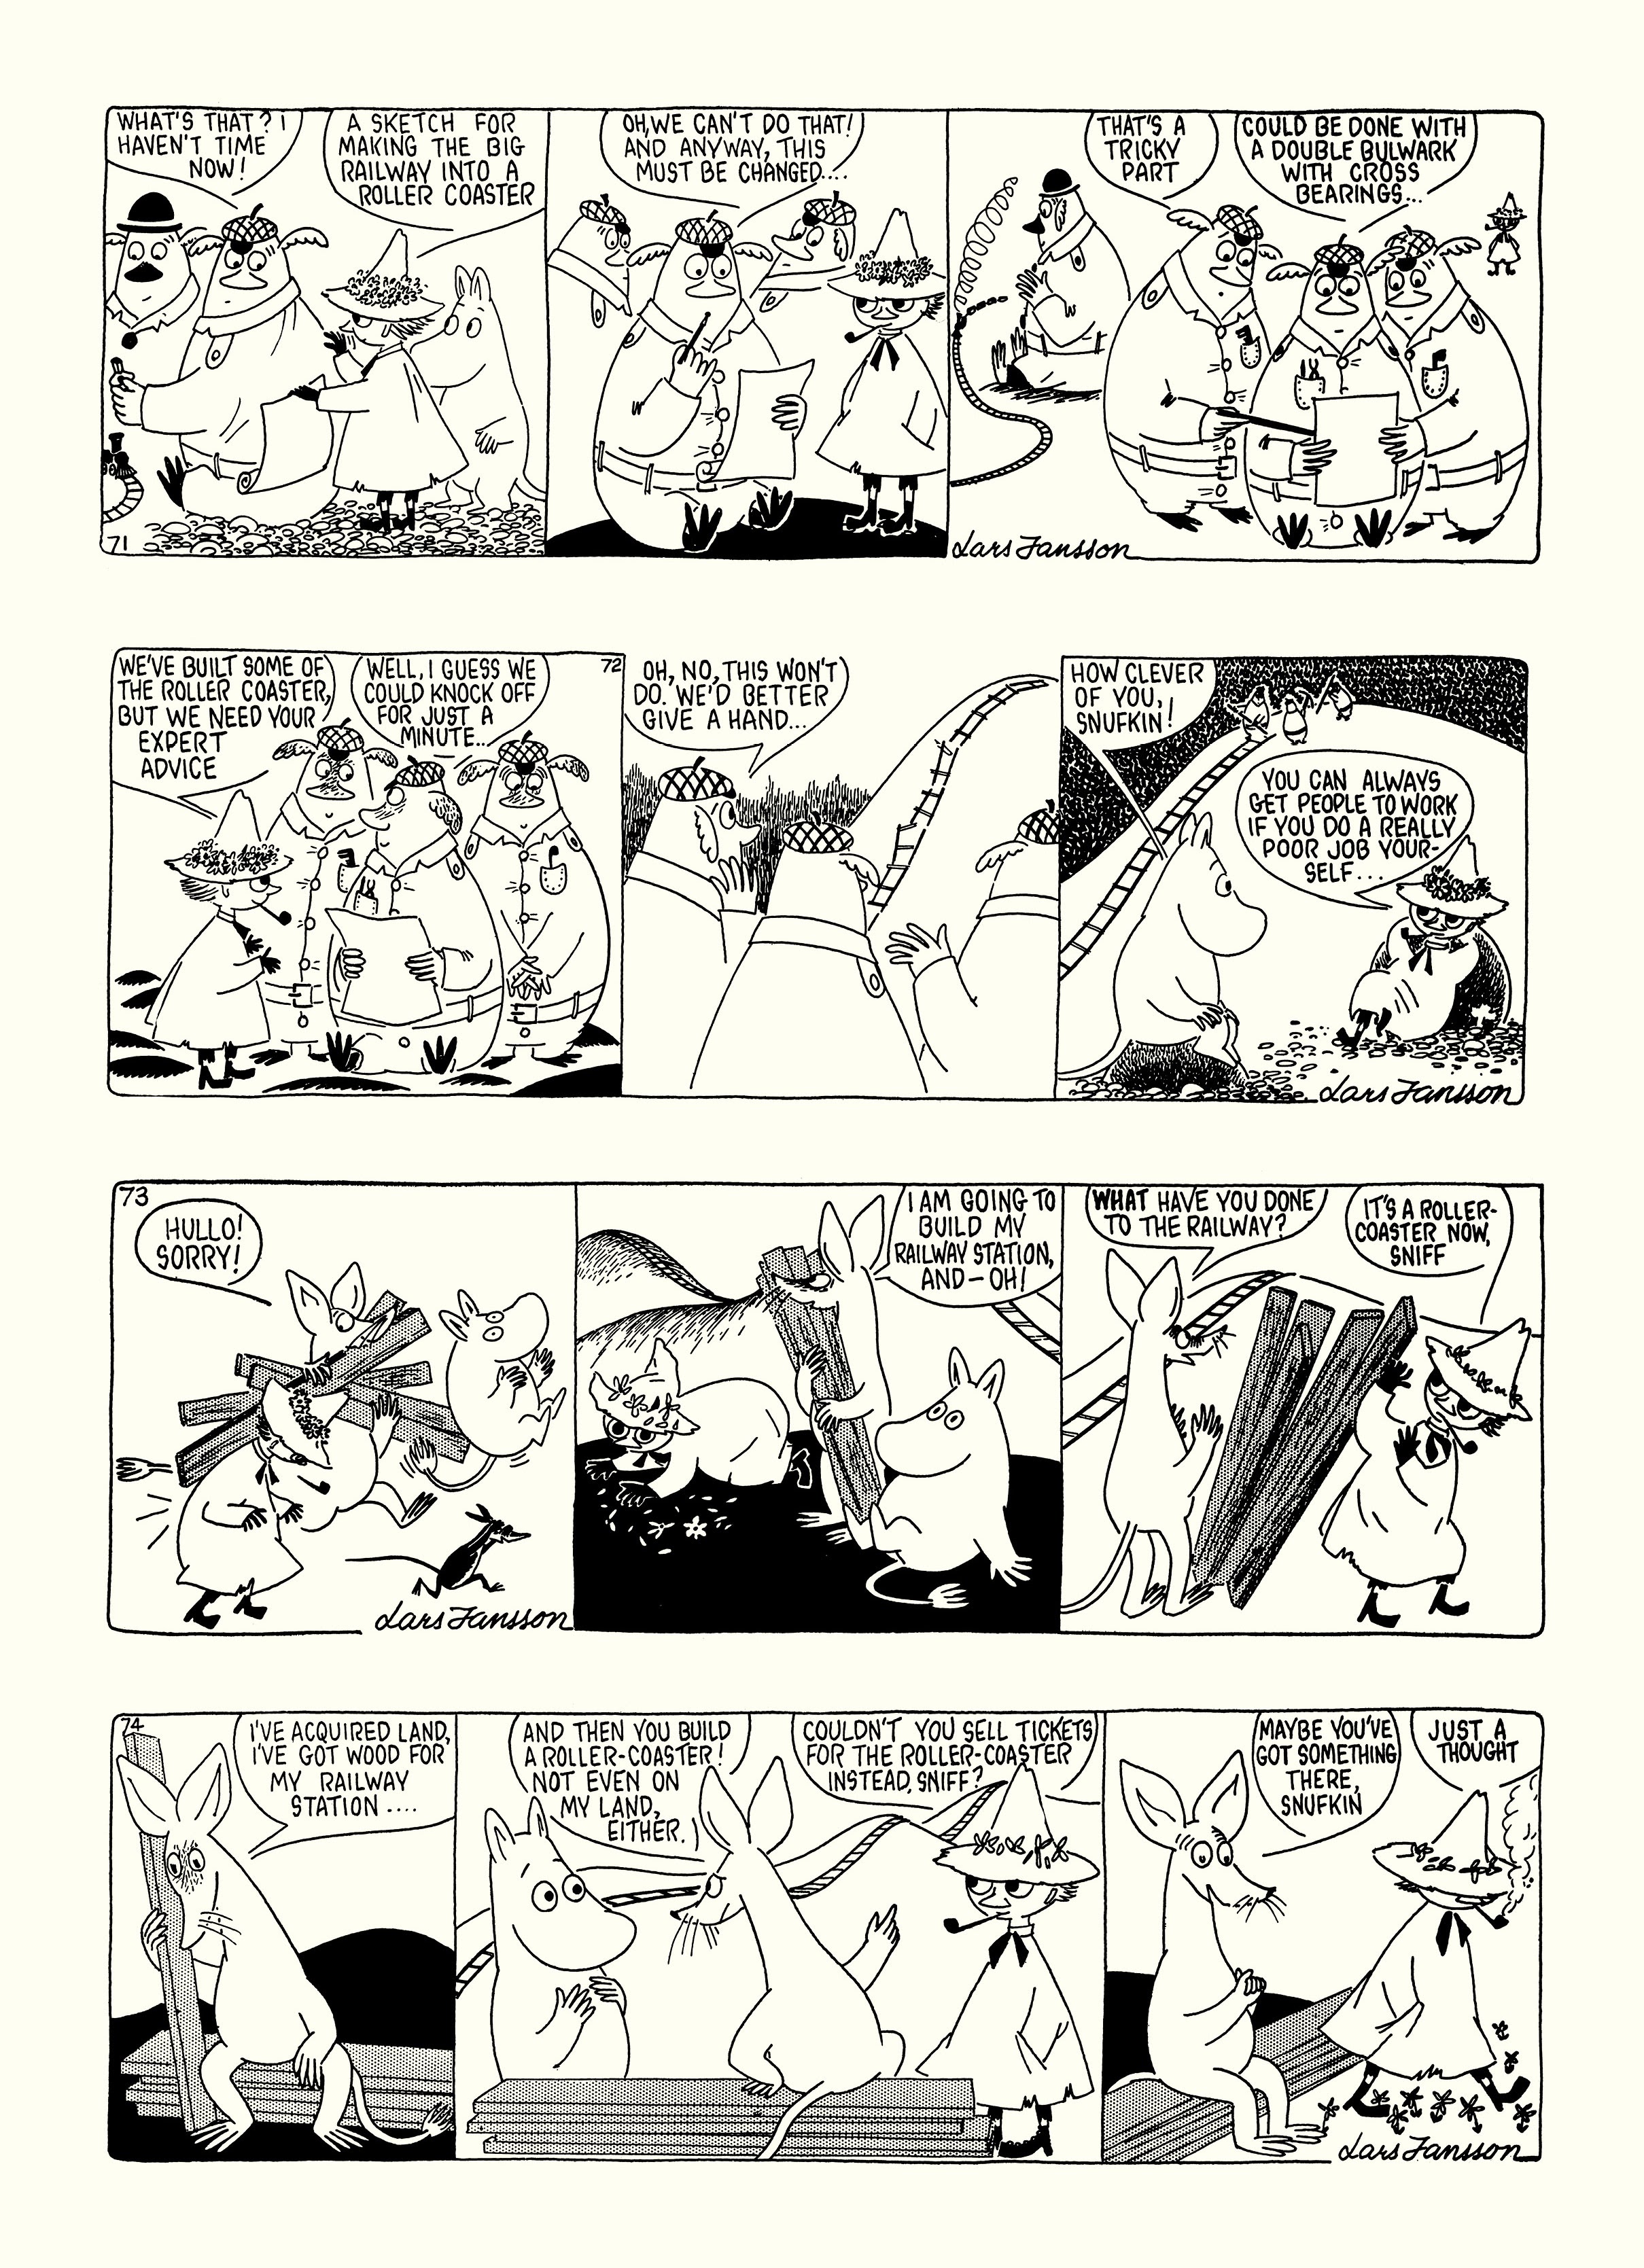 Read online Moomin: The Complete Lars Jansson Comic Strip comic -  Issue # TPB 6 - 44